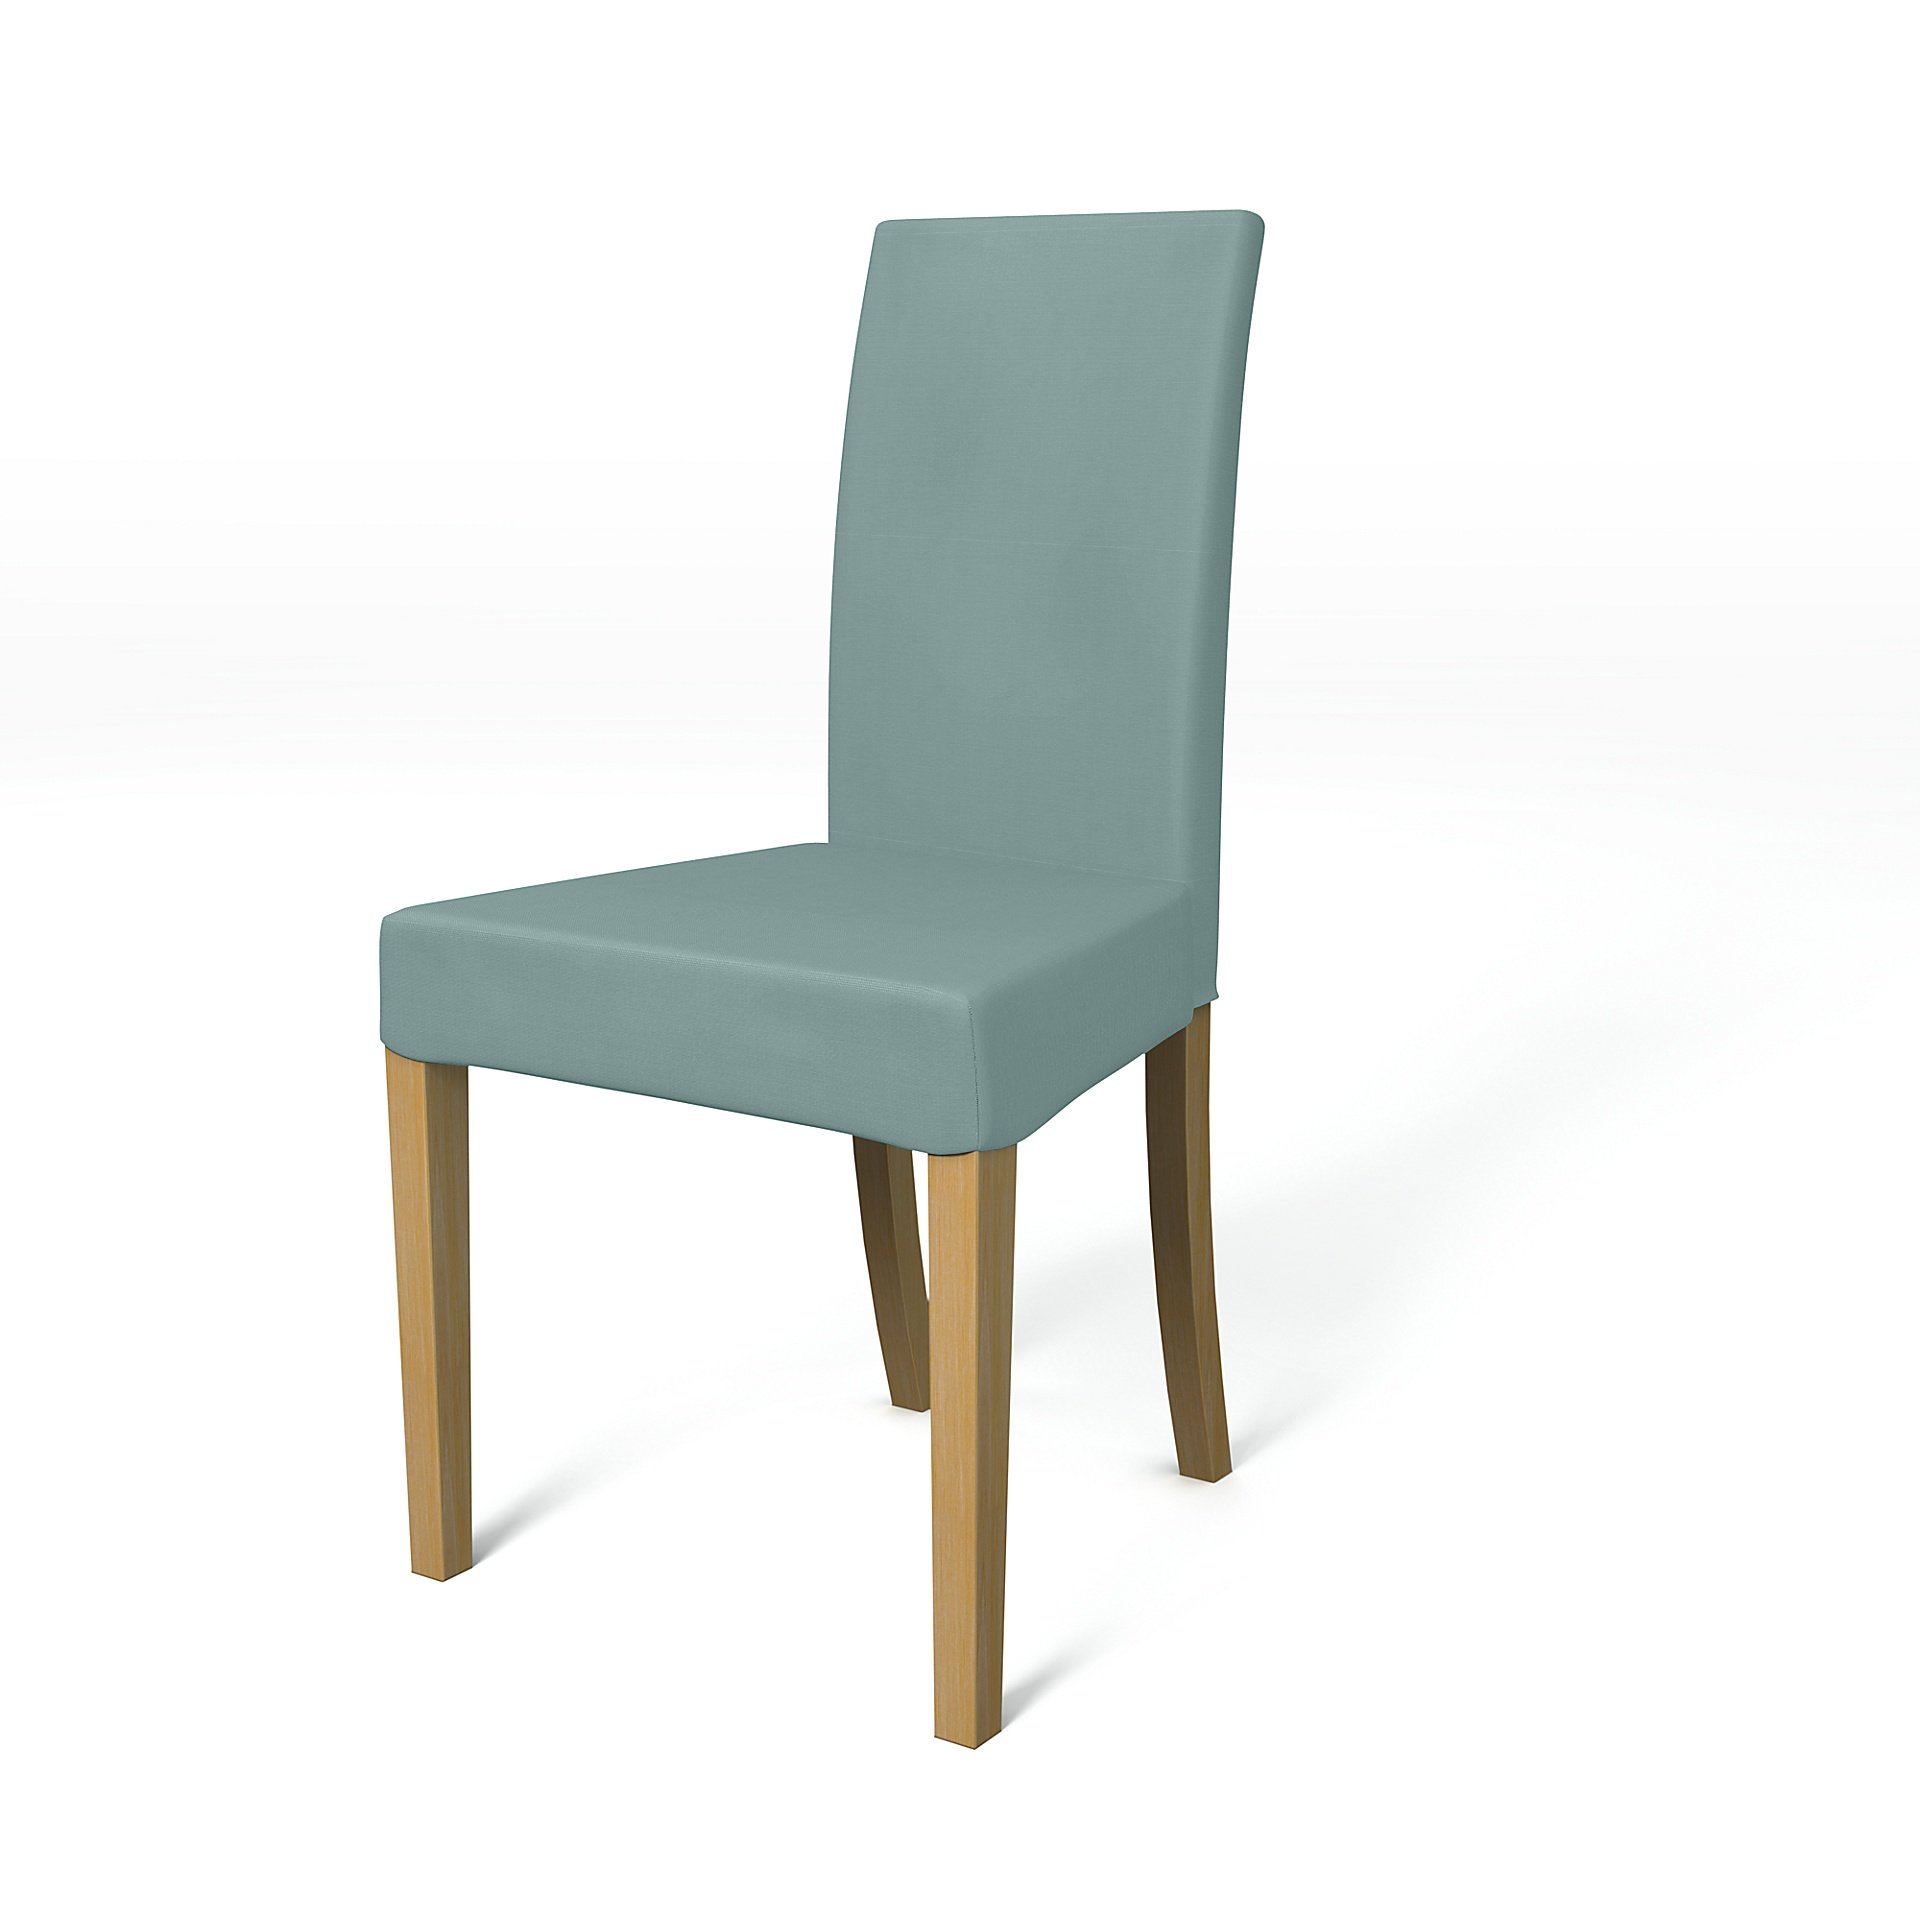 IKEA - Harry Dining Chair Cover, Mineral Blue, Cotton - Bemz